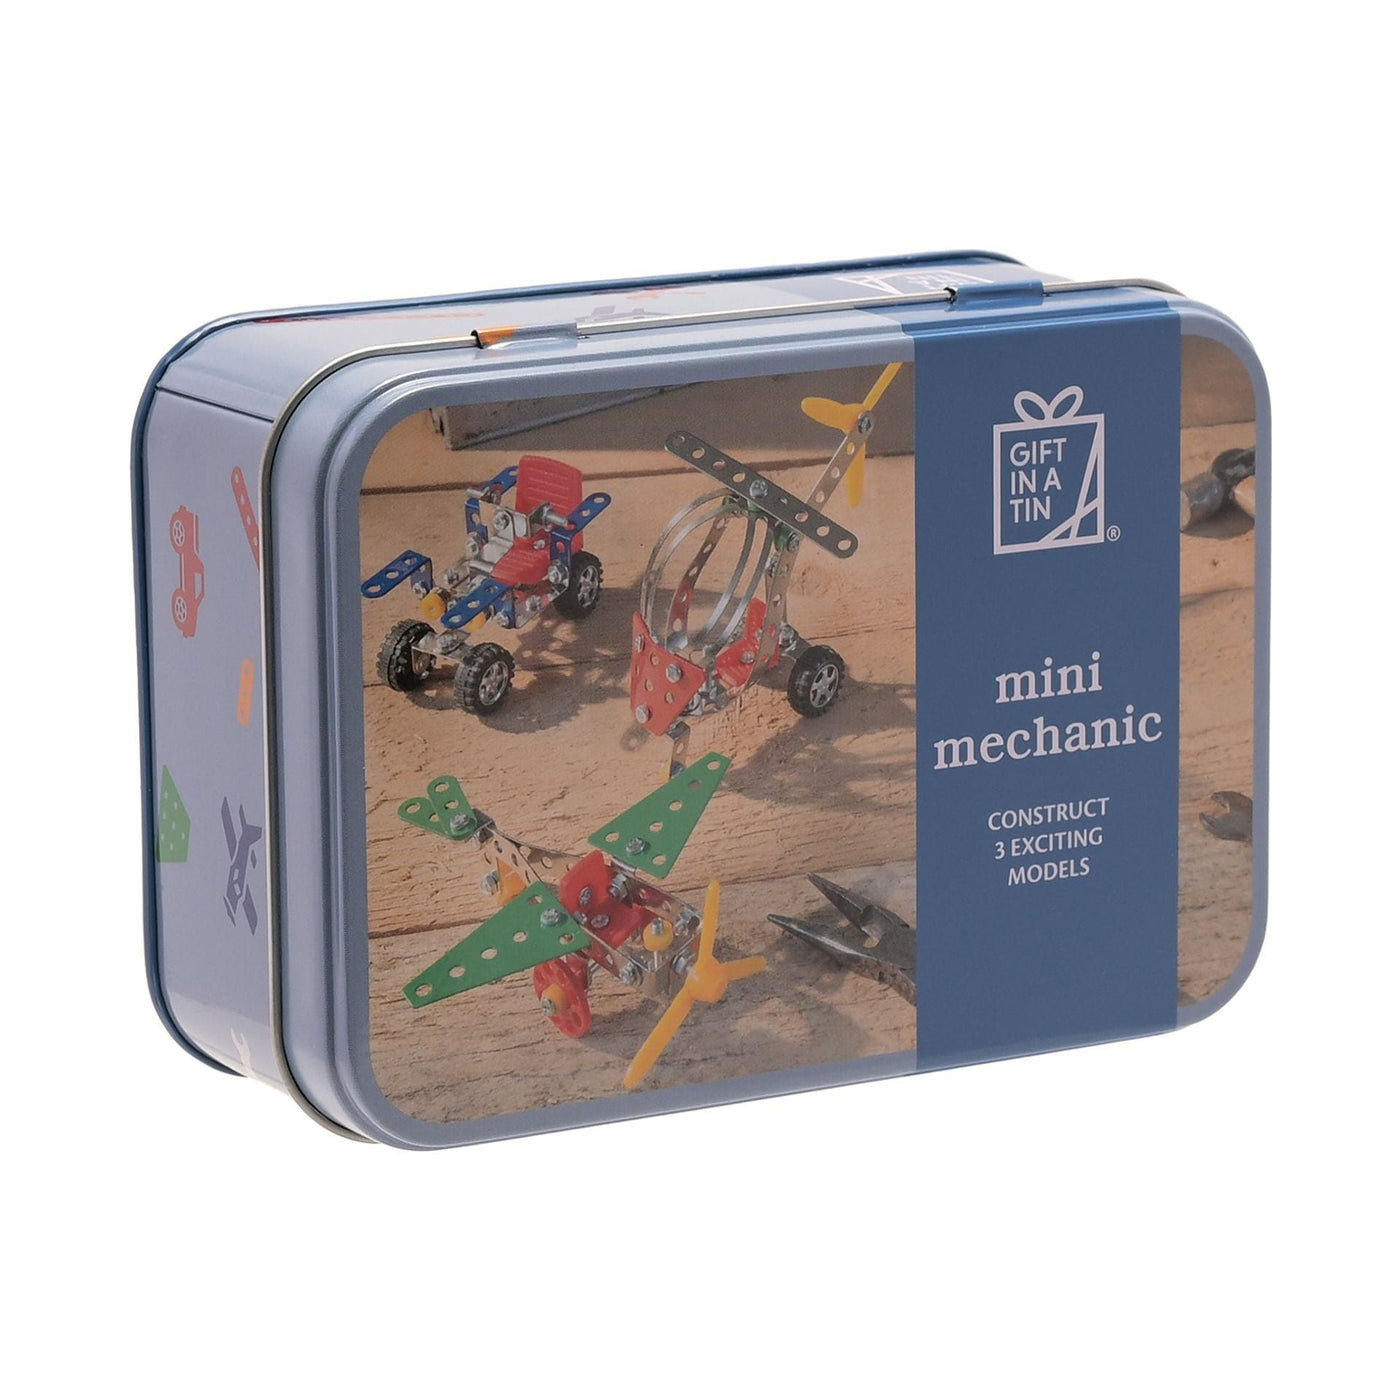 Widdop Gifts Novelty Gifts Mini Mechanic Gift in a Tin